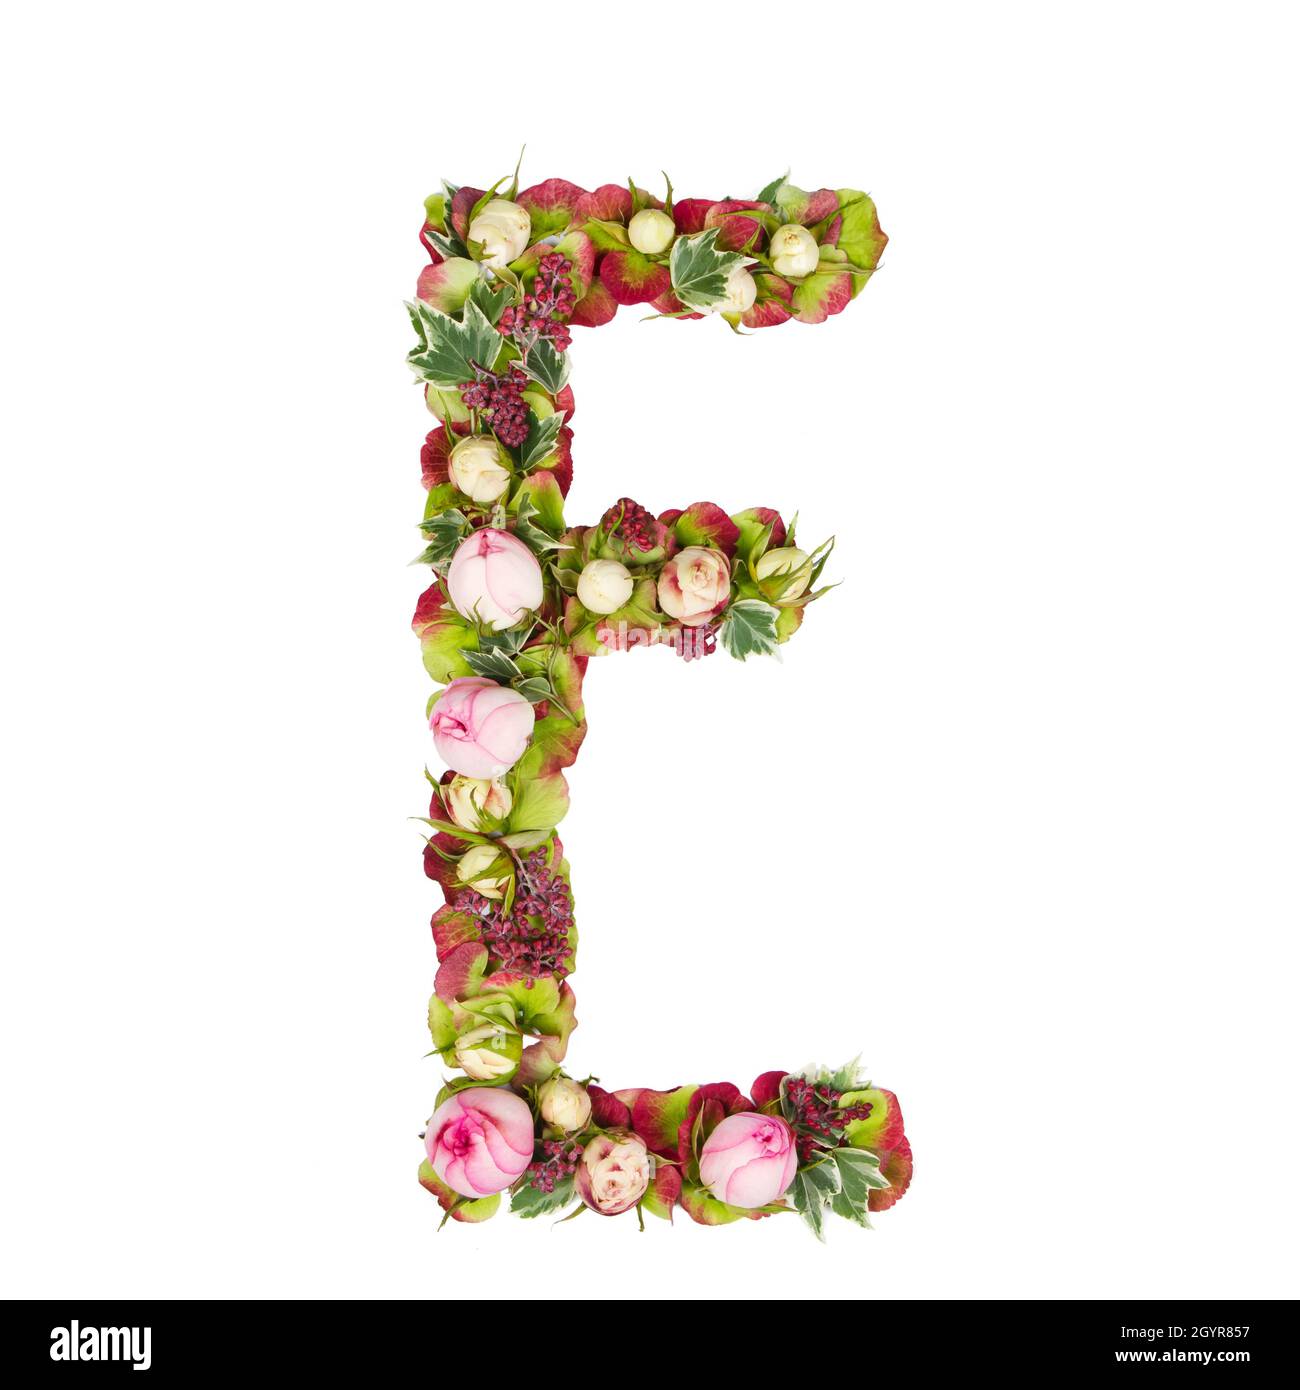 Capital Letter E Part of a set of letters, Numbers and symbols of the Alphabet made with flowers, branches and leaves on white background Stock Photo